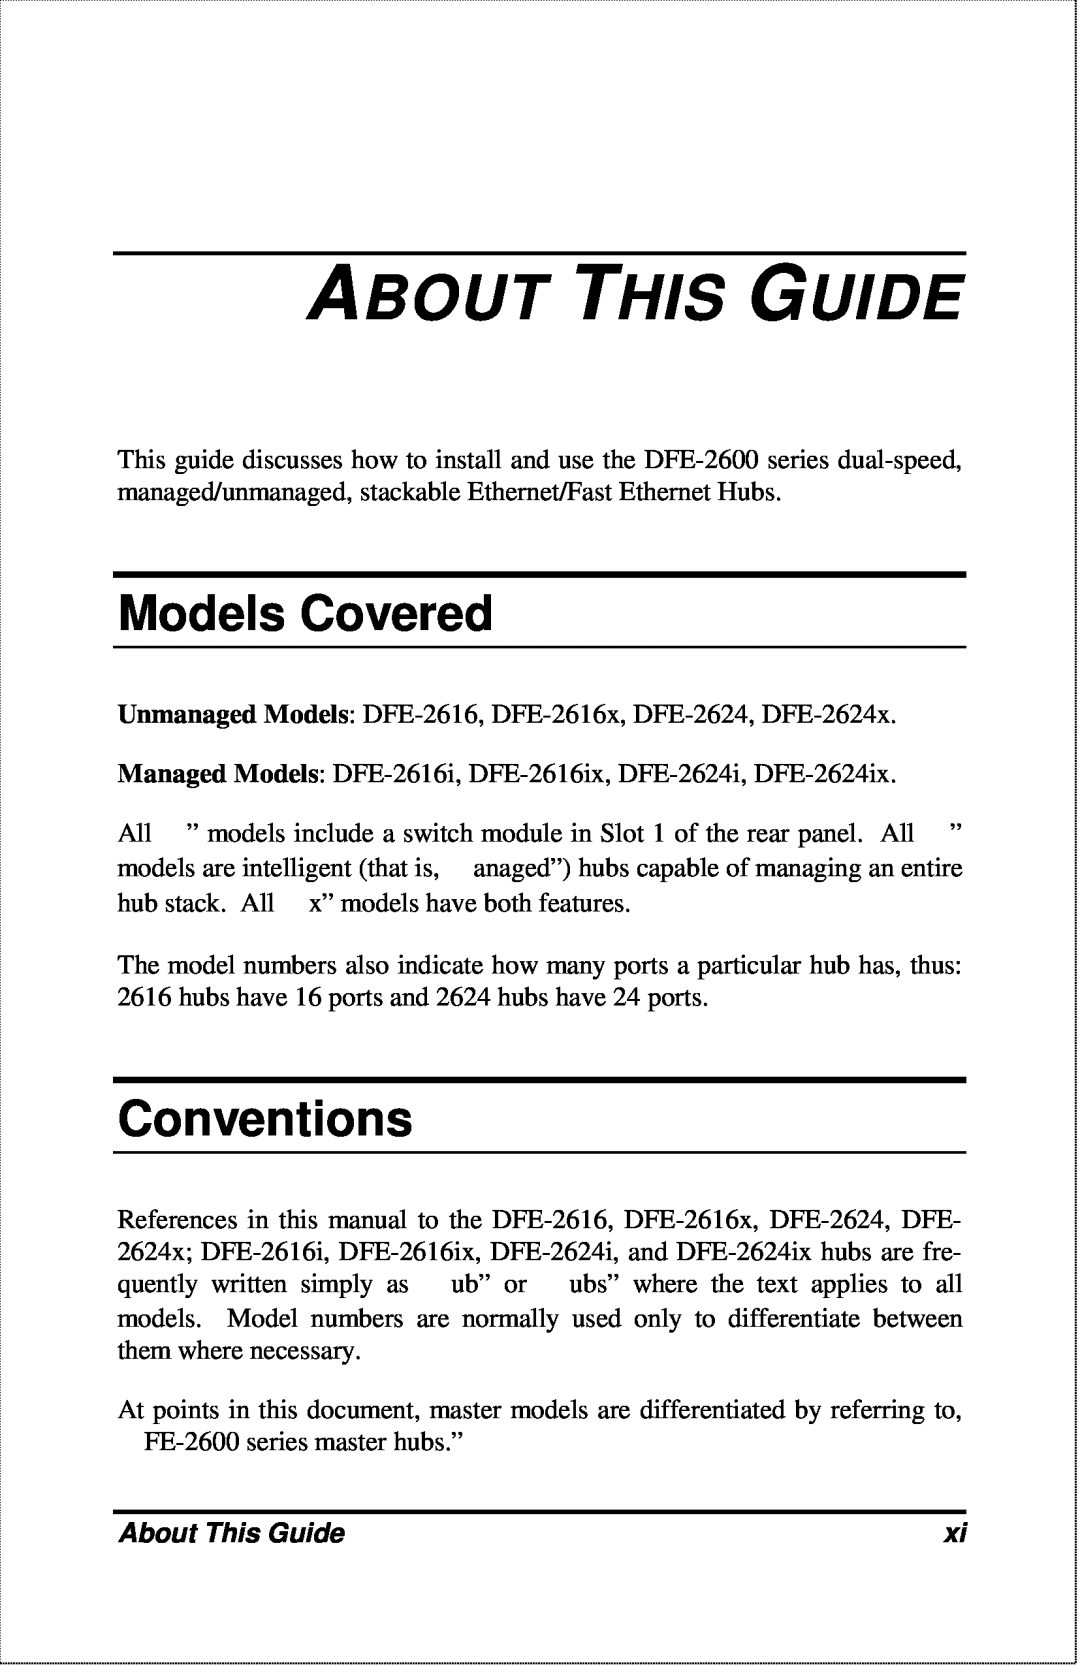 D-Link DFE-2600 manual About This Guide, Models Covered, Conventions 